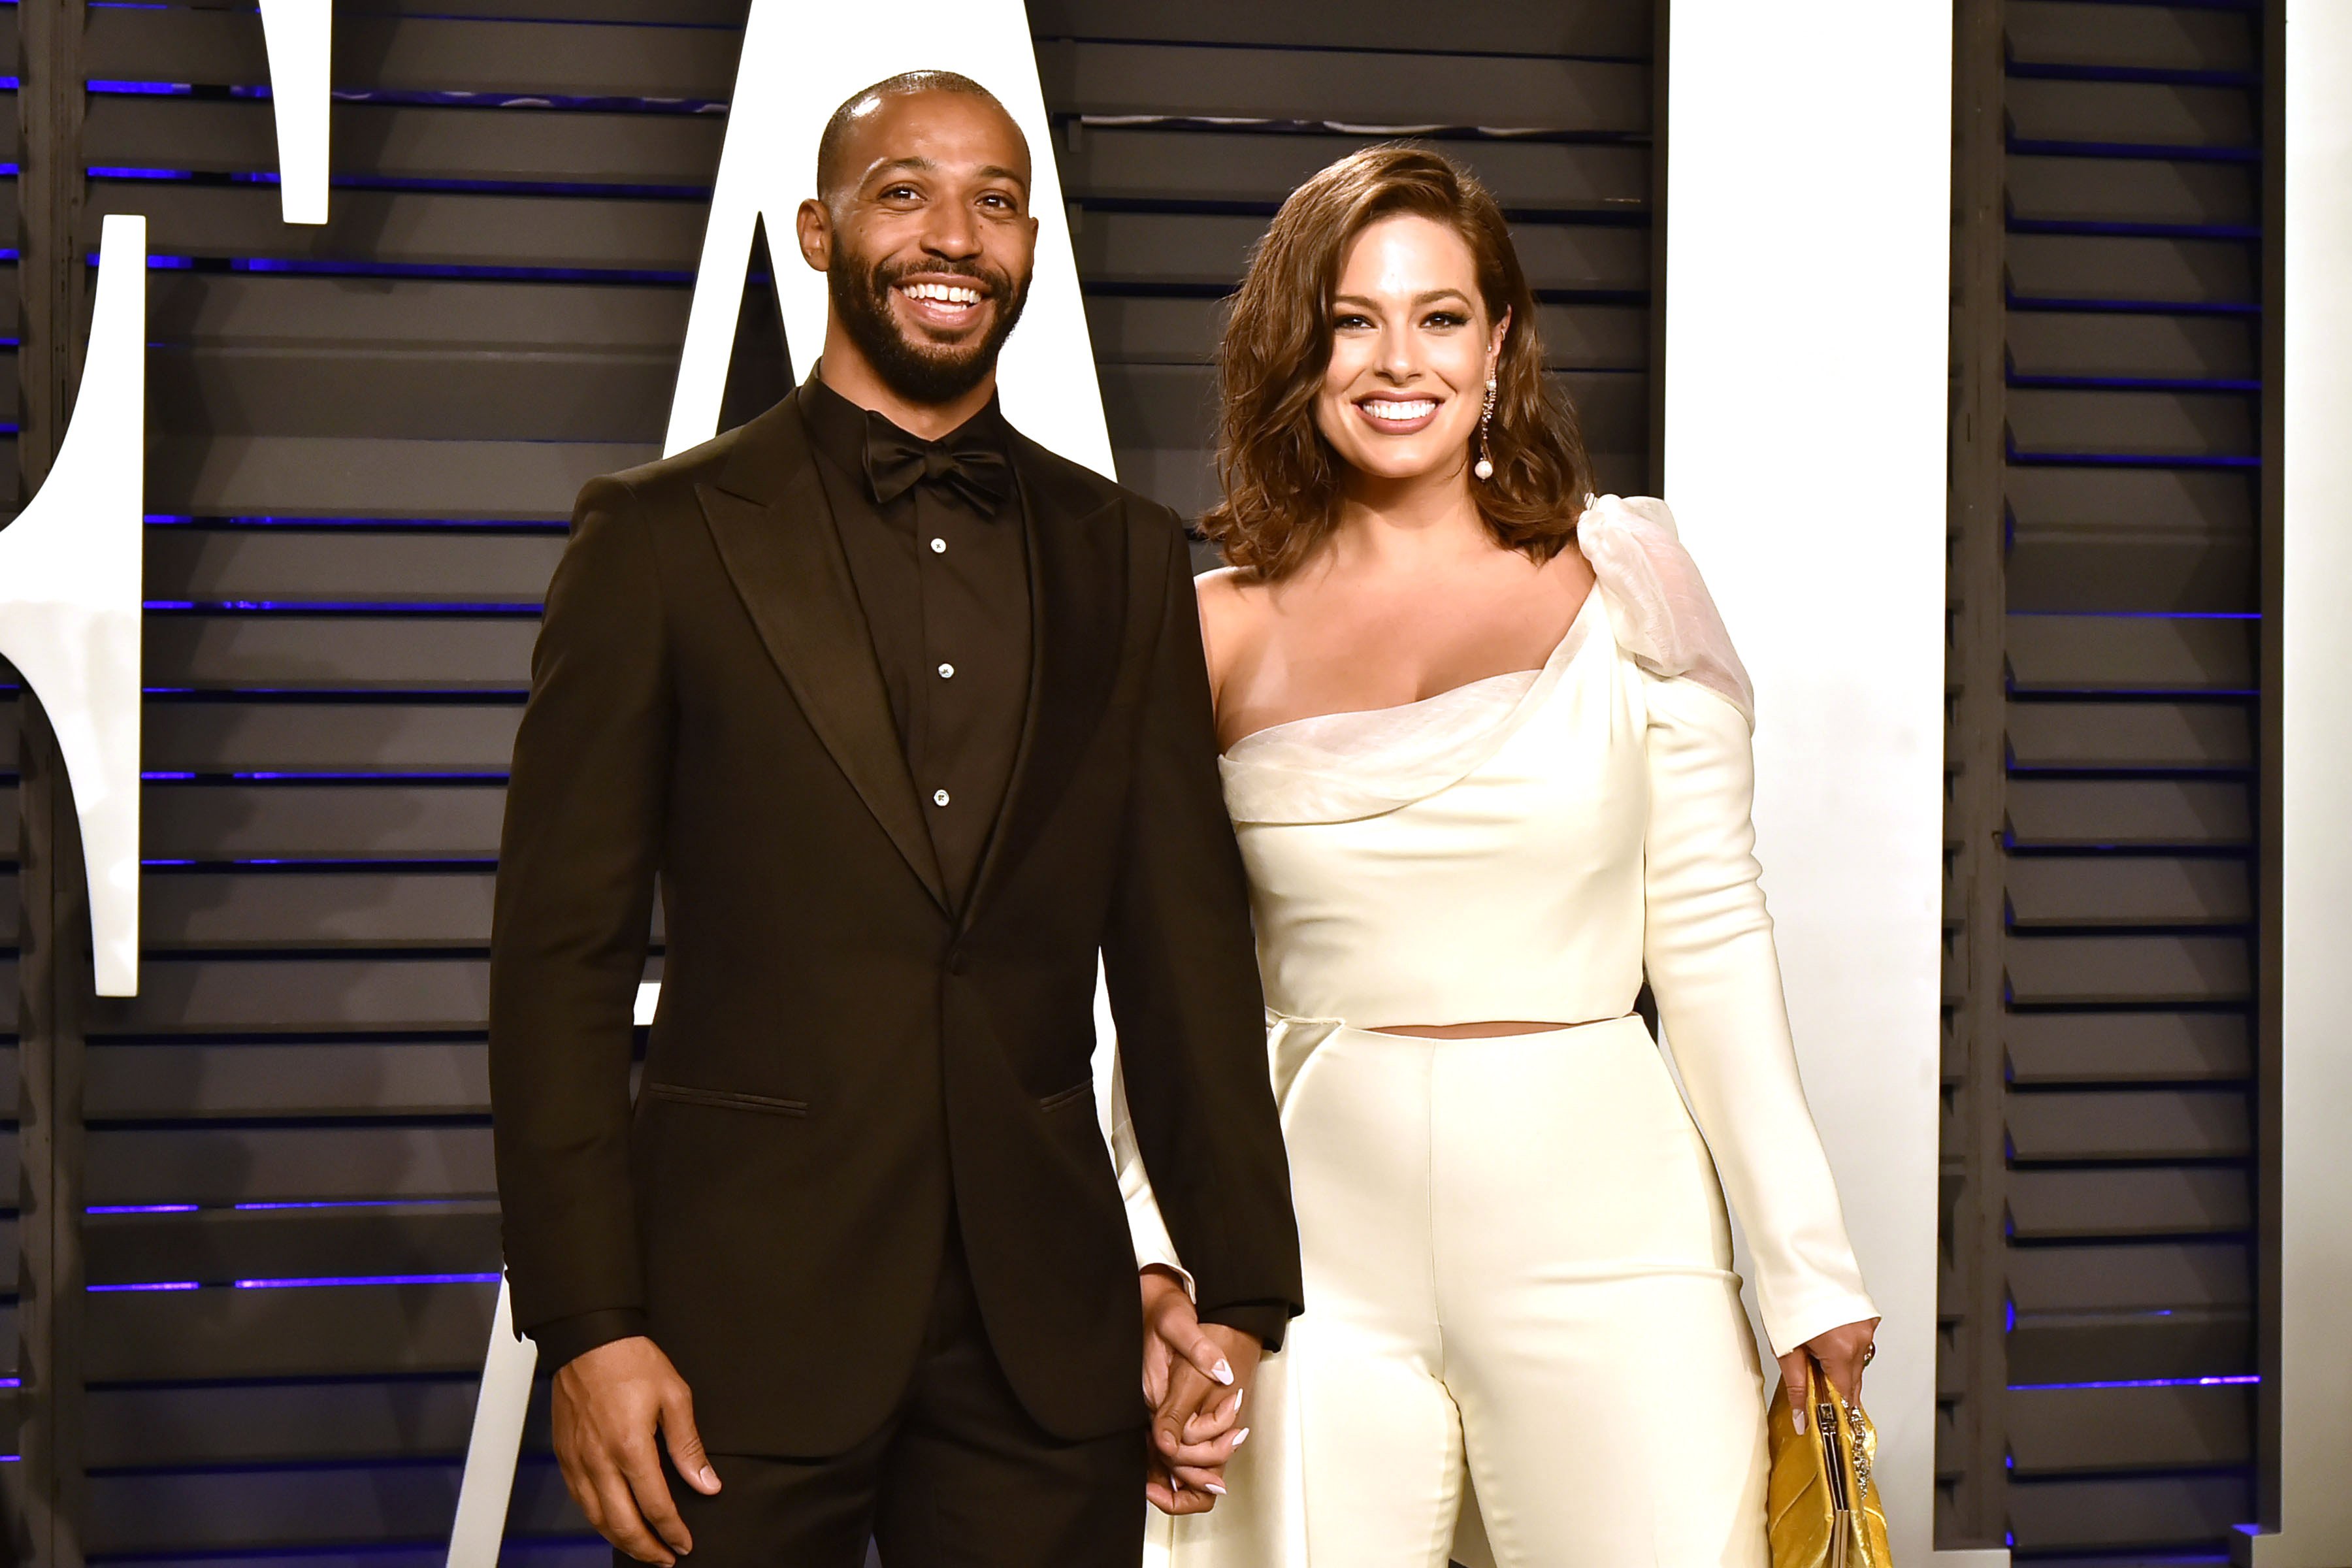 Justin Ervin and Ashley Graham attend the 2019 Vanity Fair Oscar Party on February 24, 2019 | Photo: Getty Images